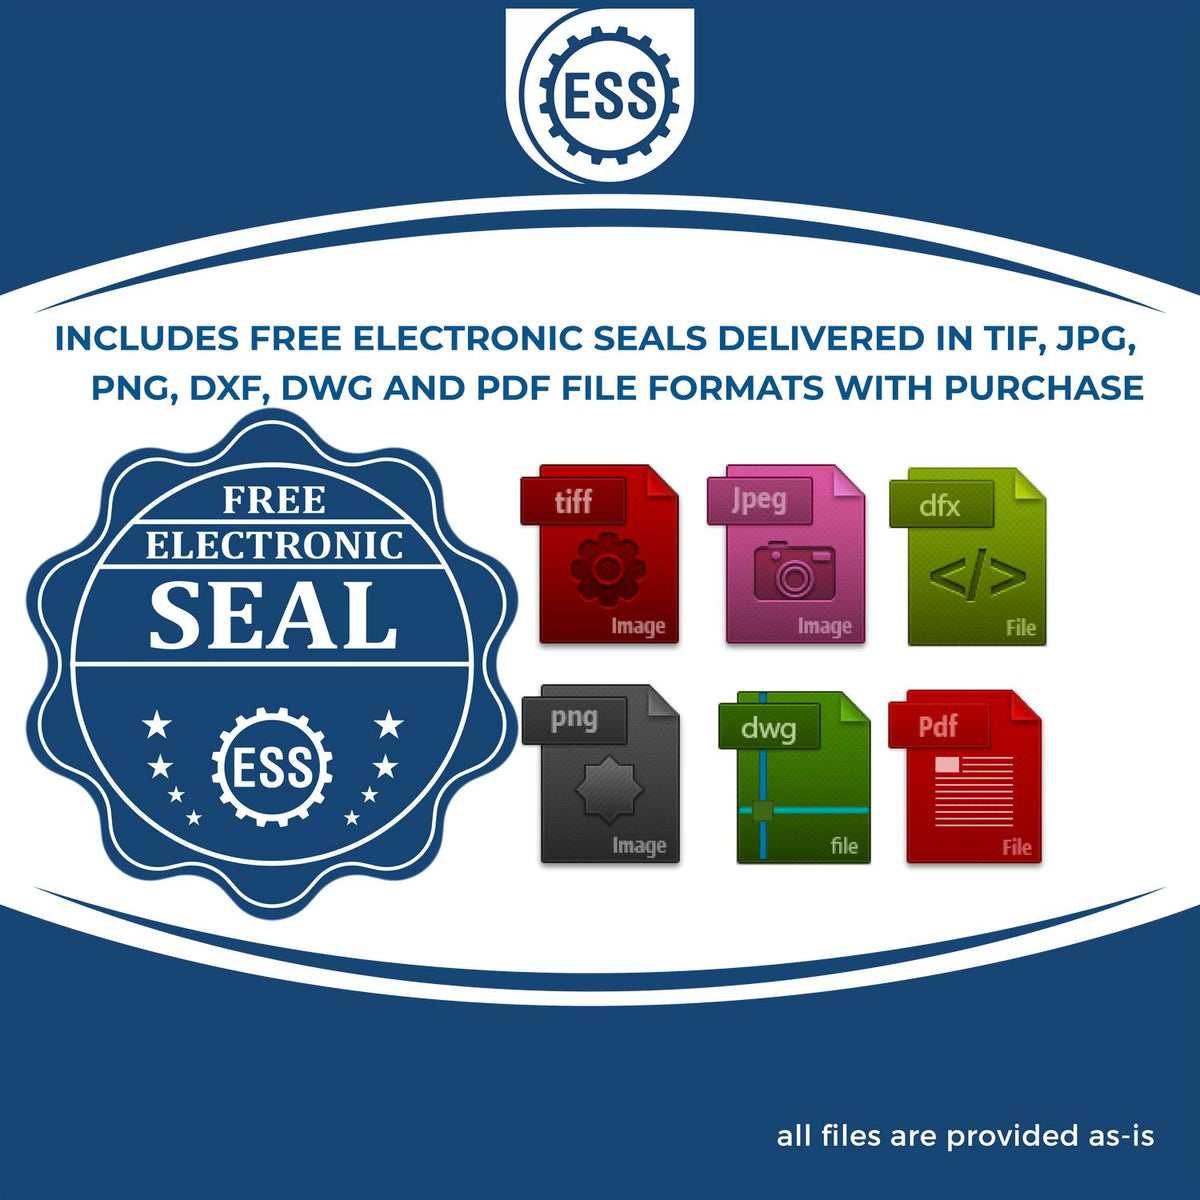 An infographic for the free electronic seal for the Self-Inking North Dakota Landscape Architect Stamp illustrating the different file type icons such as DXF, DWG, TIF, JPG and PNG.